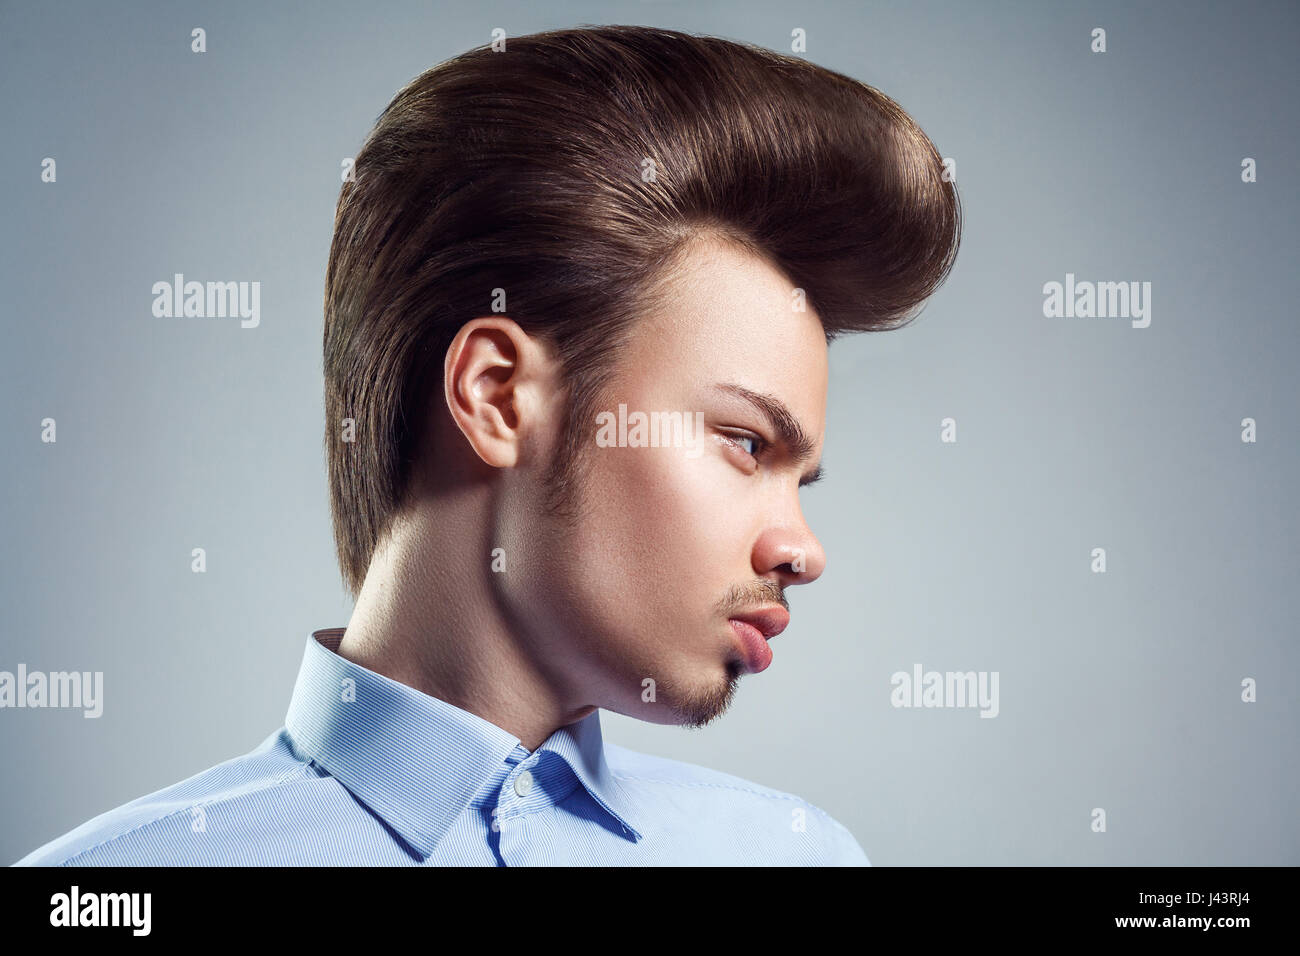 Free Stock Photo of Stylish woman with mullet hairstyle  Download Free  Images and Free Illustrations